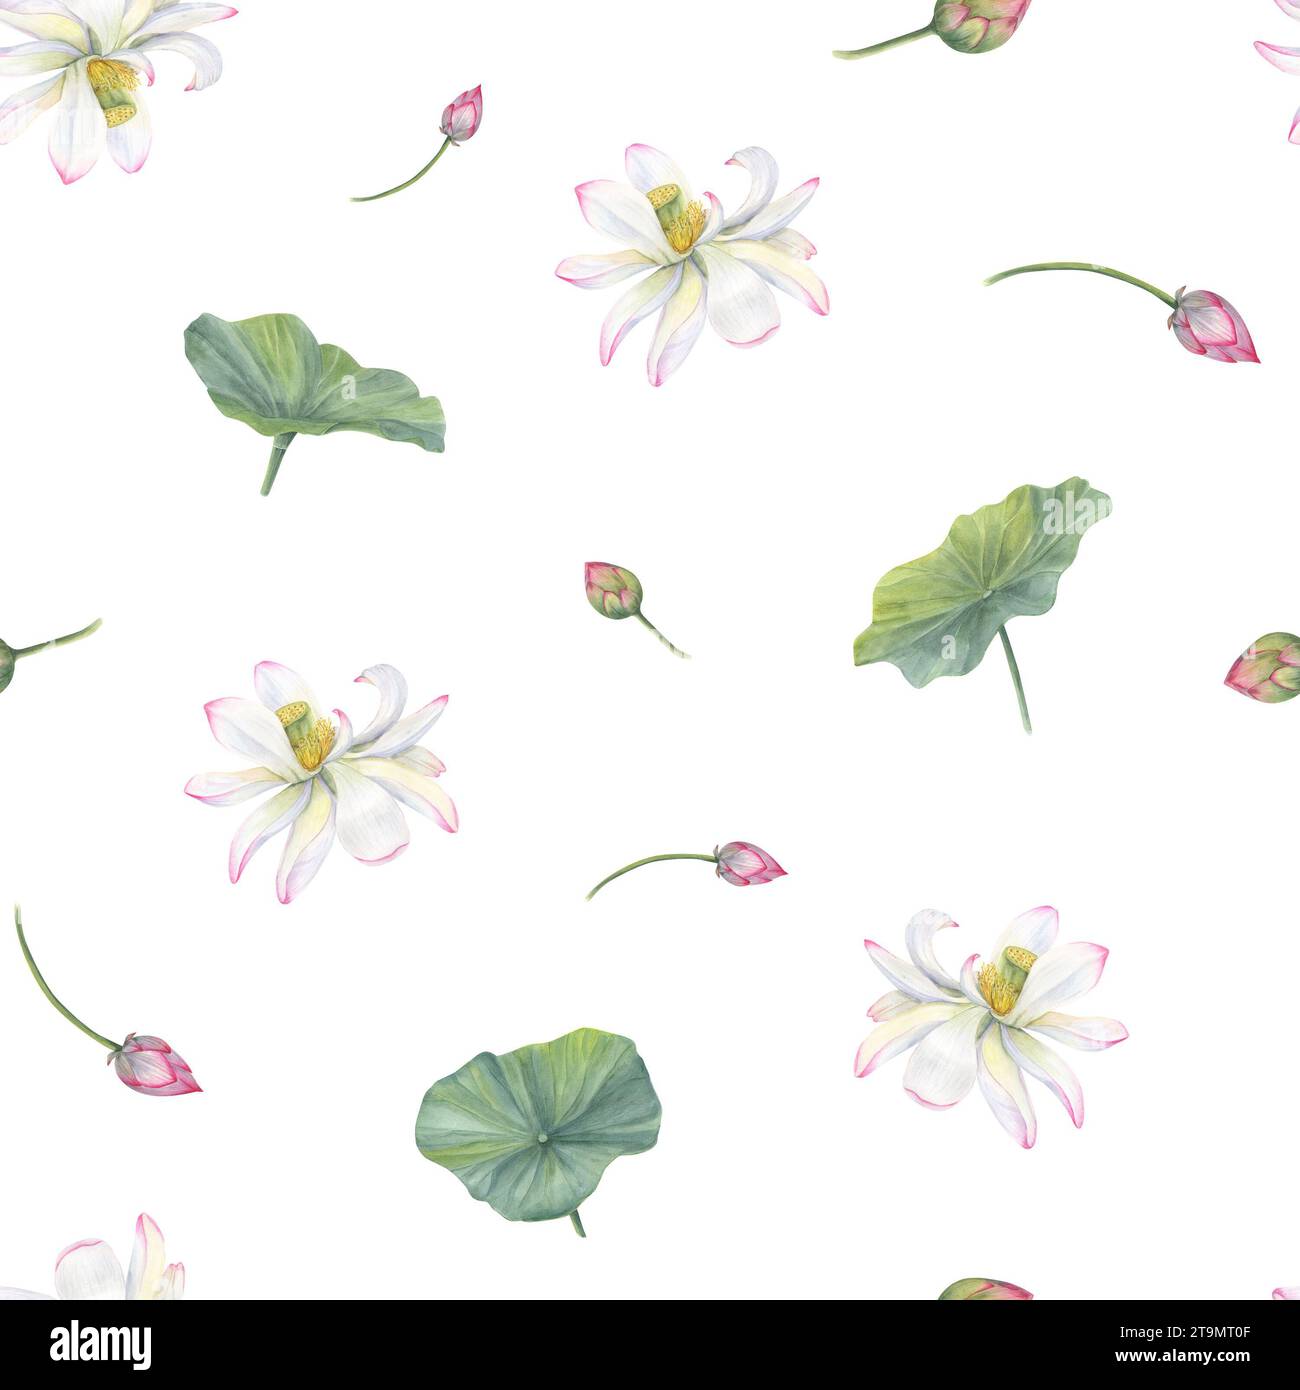 White pink lotus flowers, green leaves. Seamless pattern of blooming water lily. Stock Photo